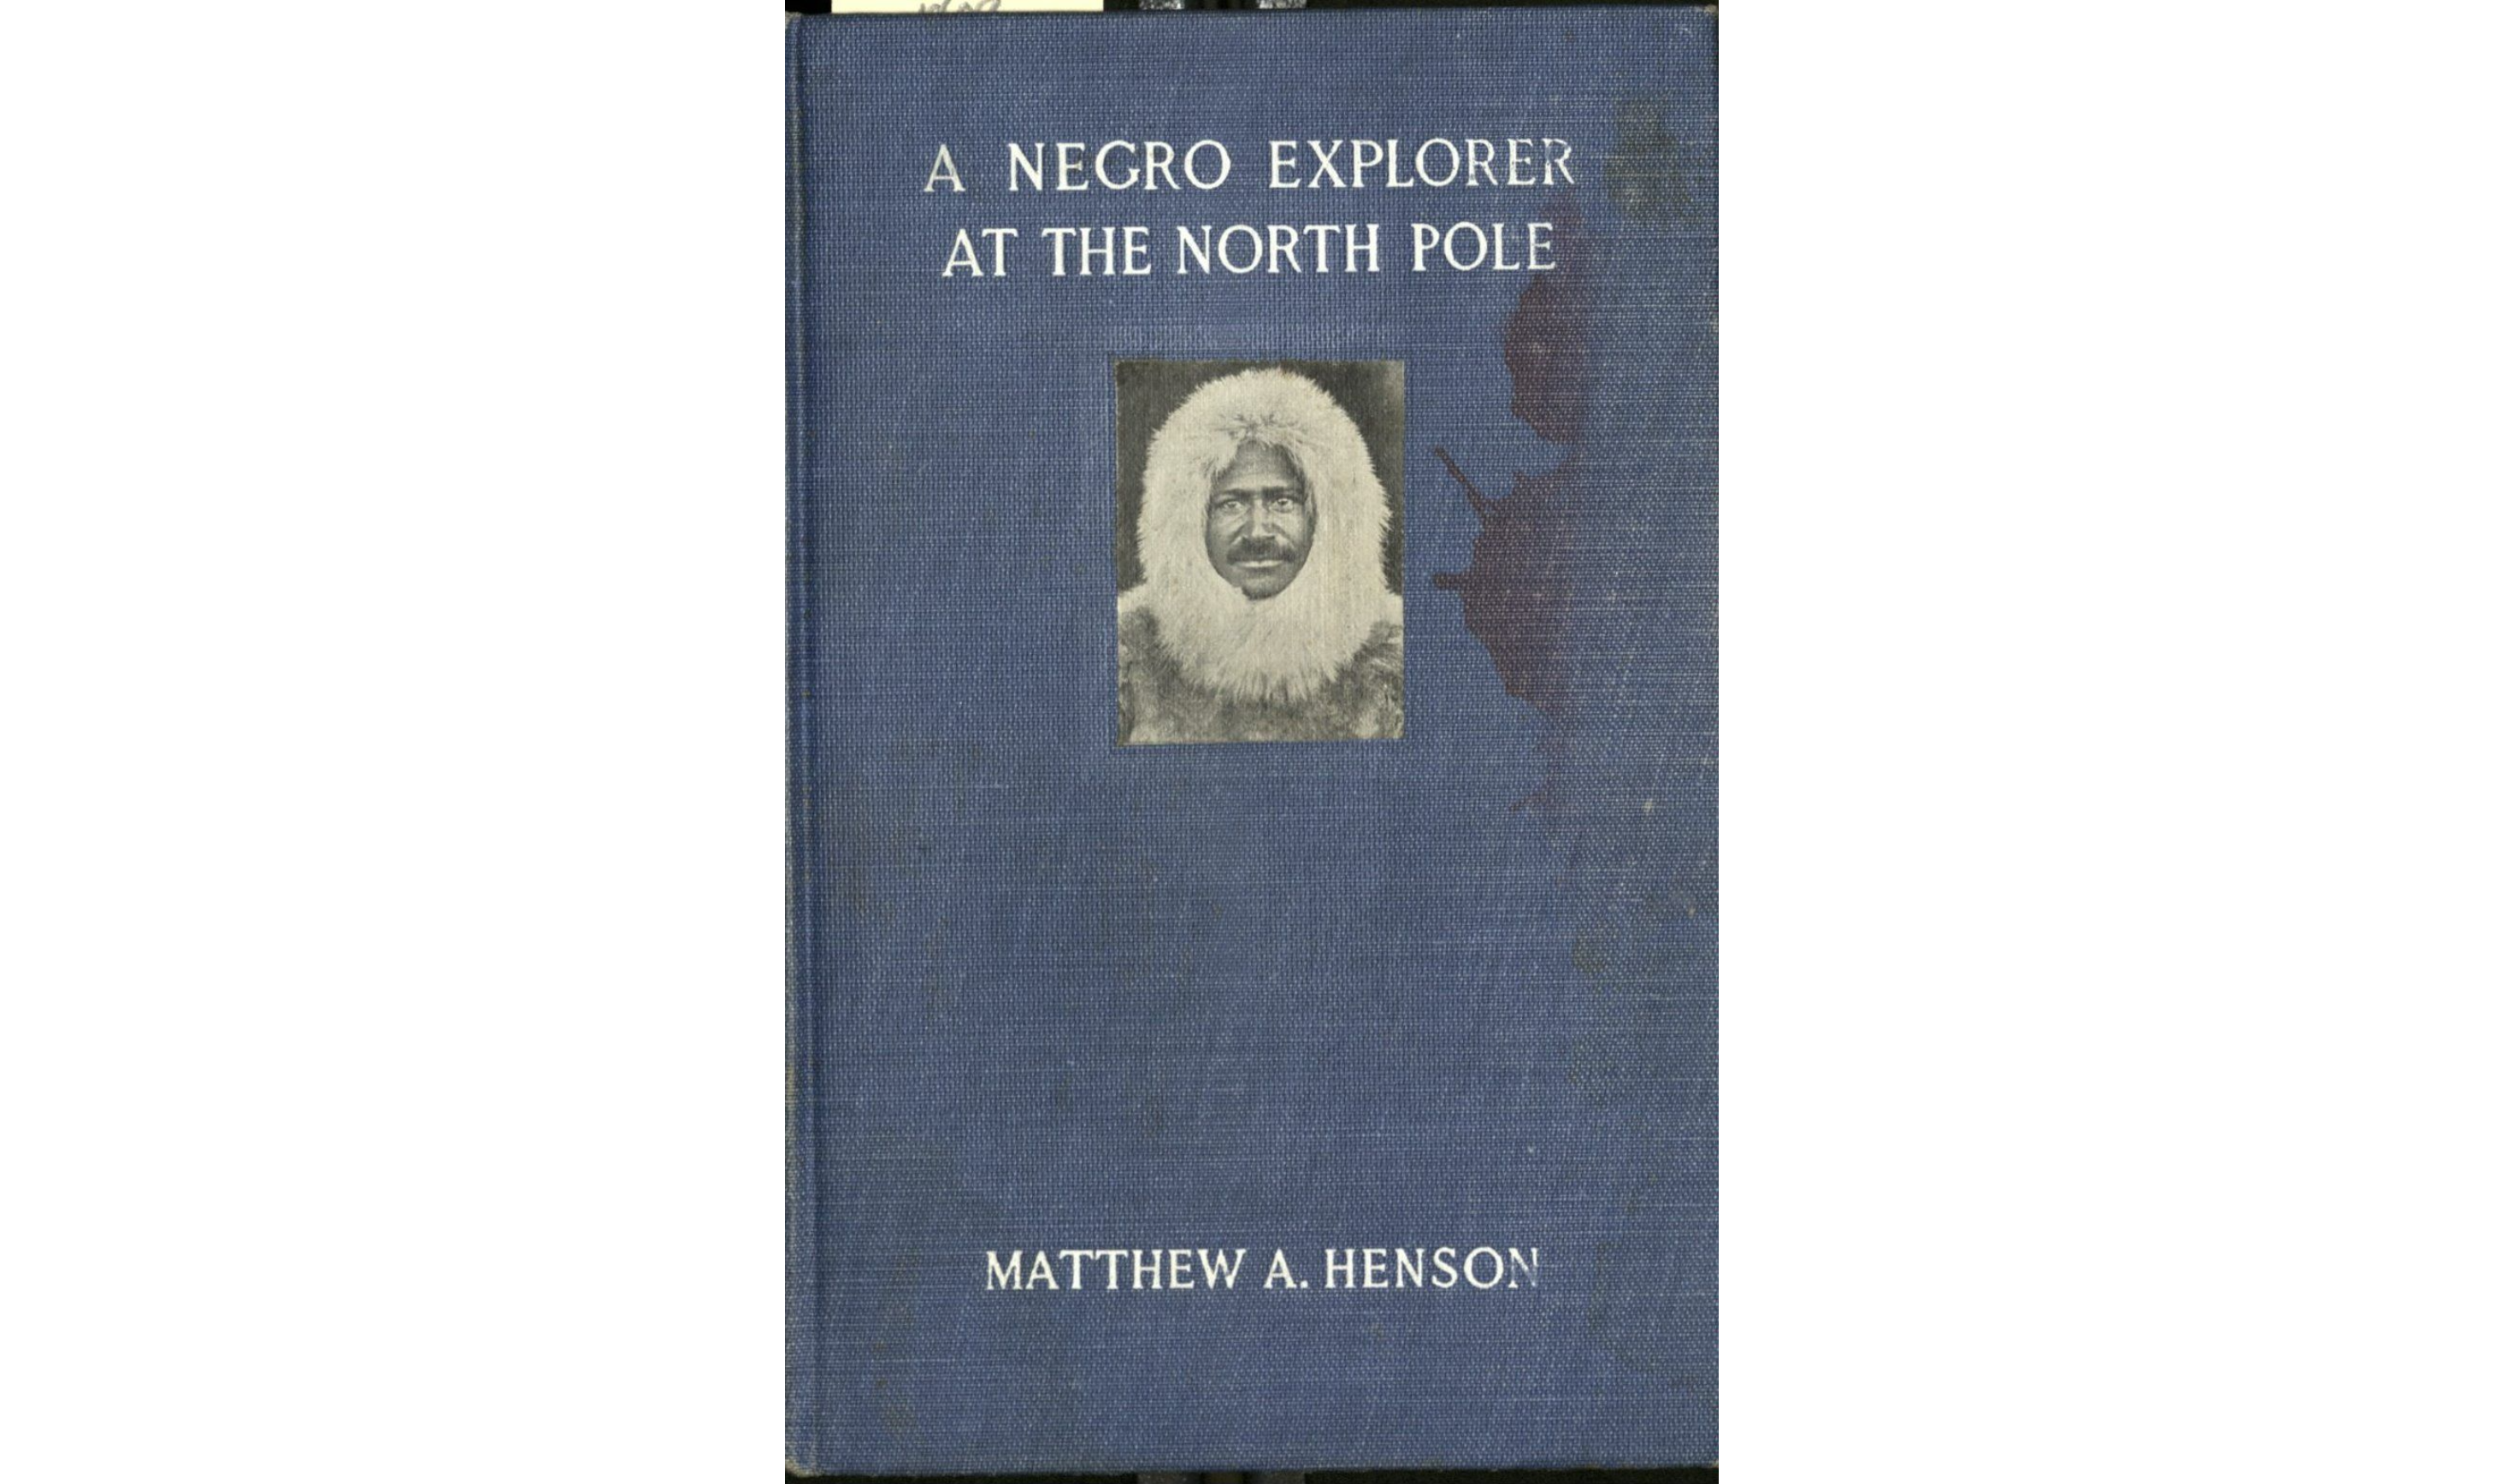 Cover of Matthew A. Henson's autobiography A Negro Explorer at the North Pole.